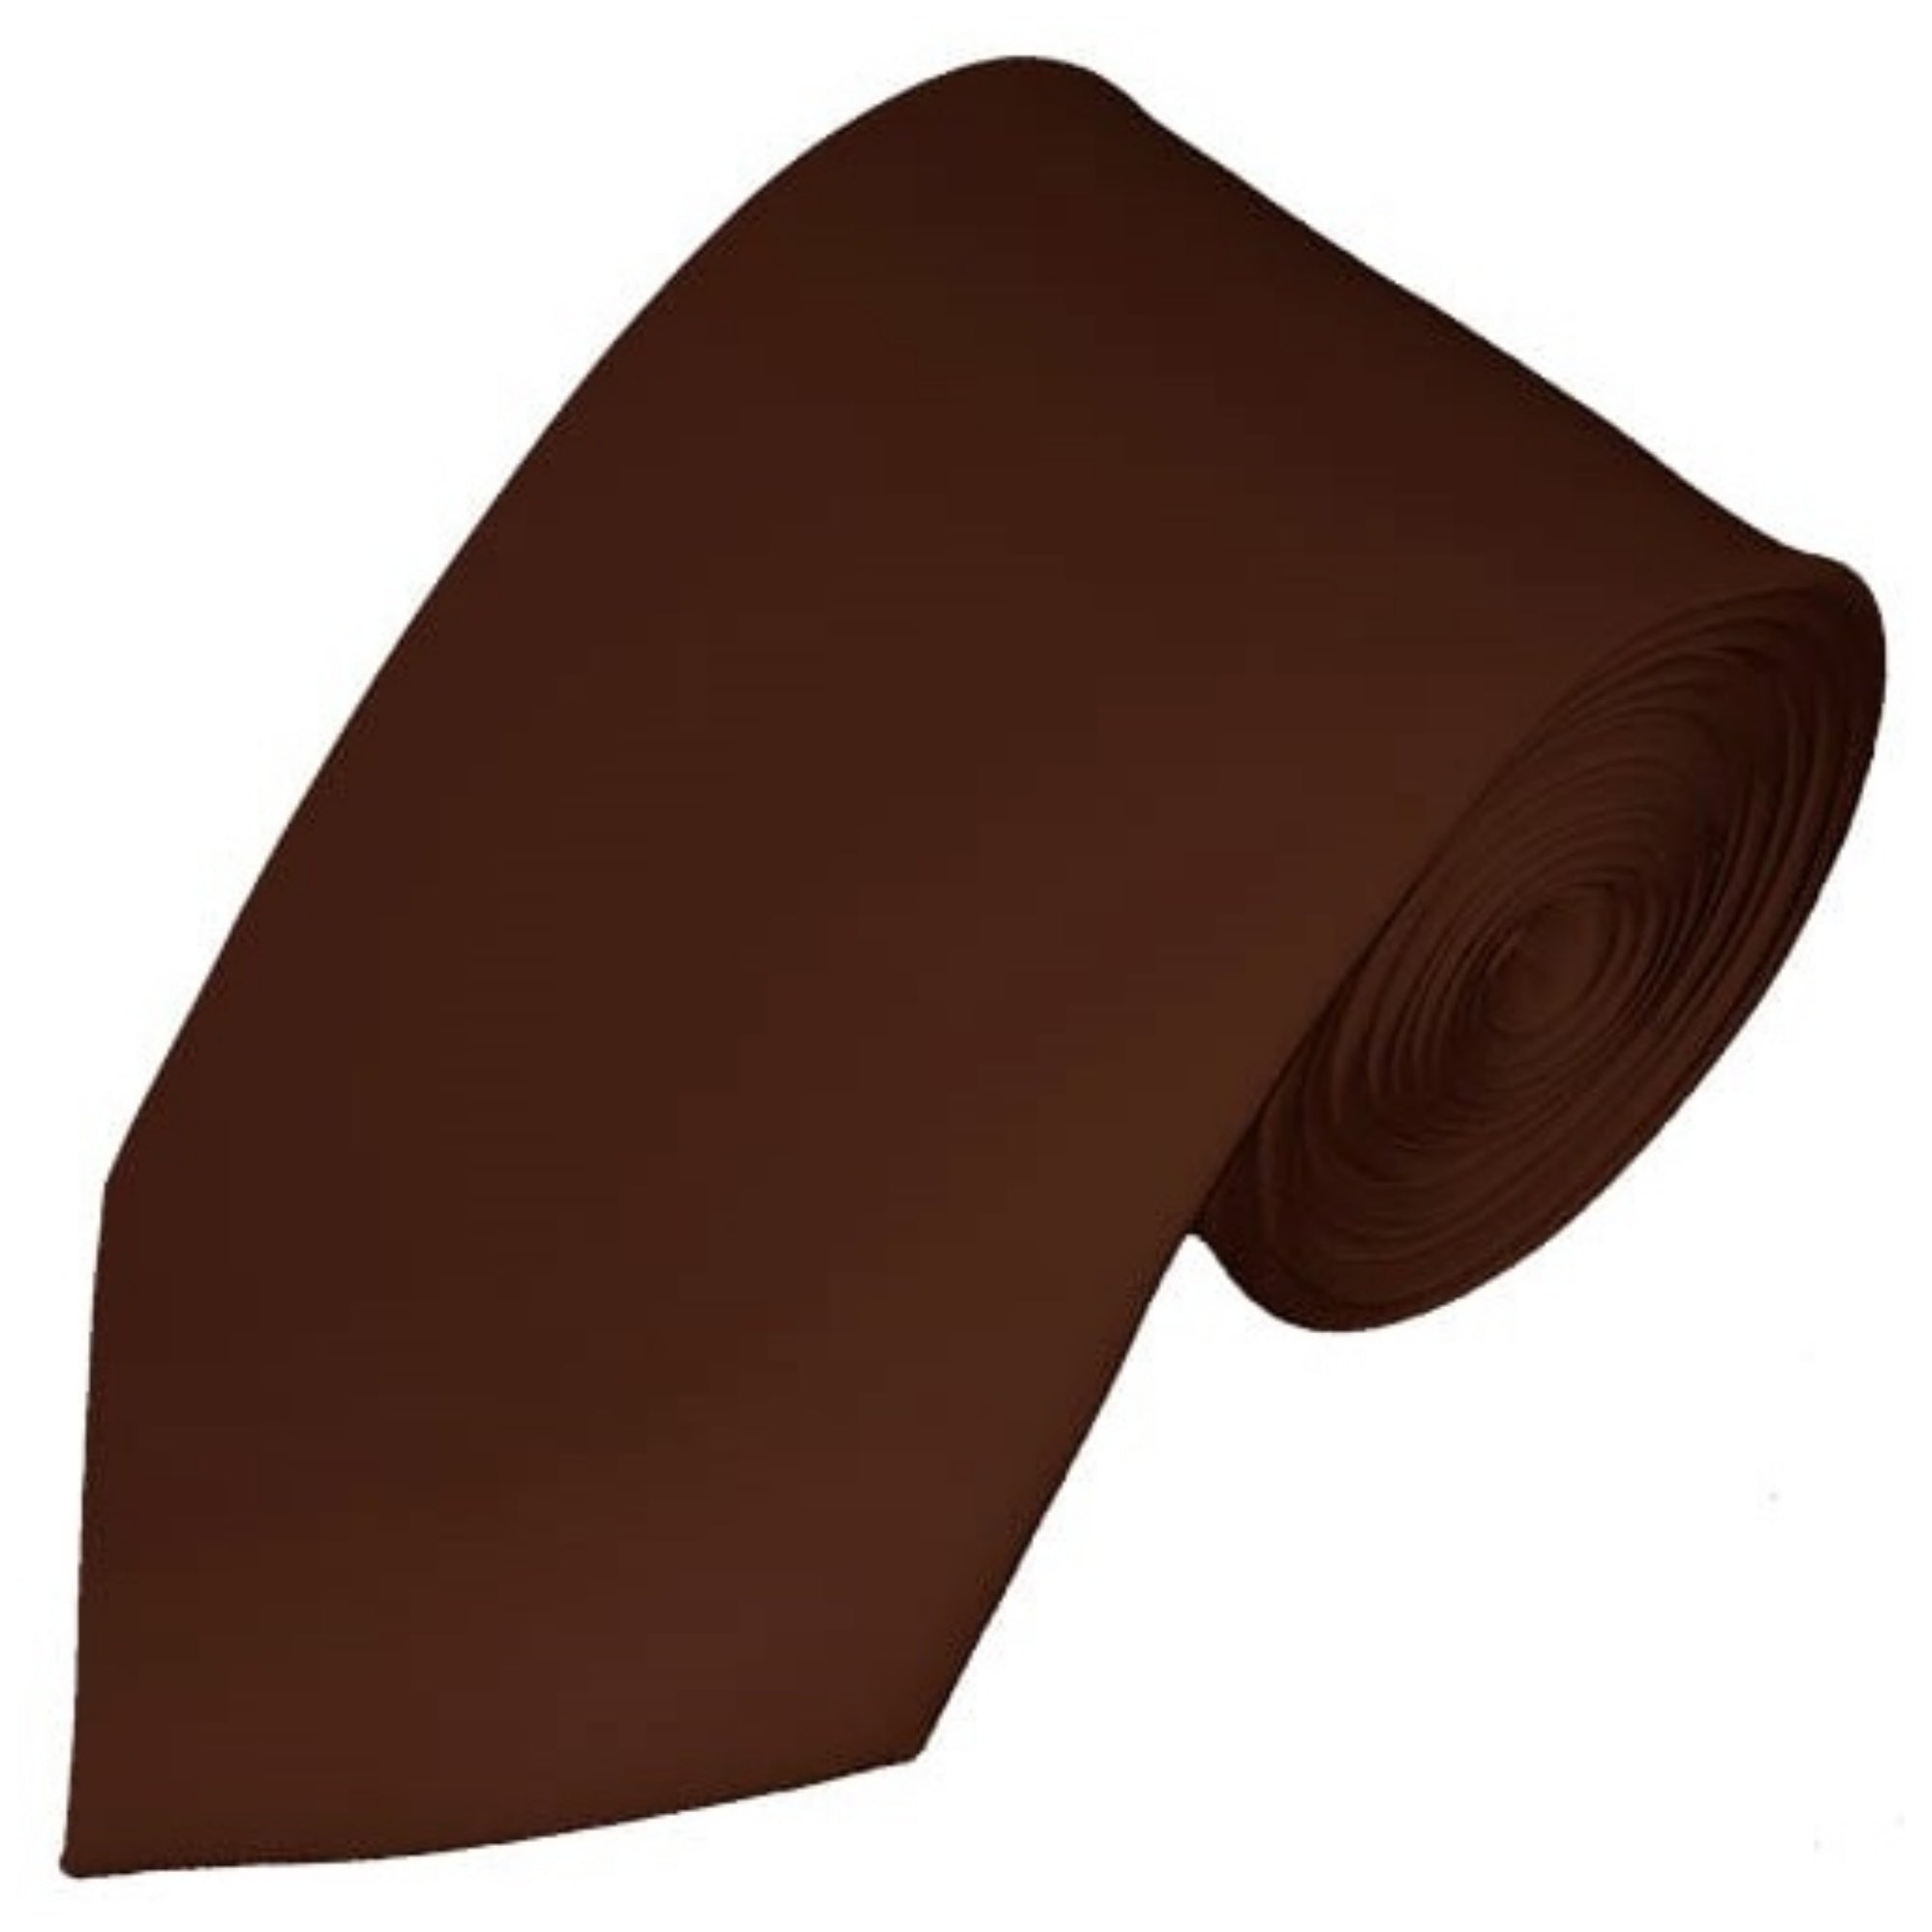 TheDapperTie Men's Solid Color Slim 2.75 Inch Wide And 58 Inch Long Neckties Neck Tie TheDapperTie Brown  